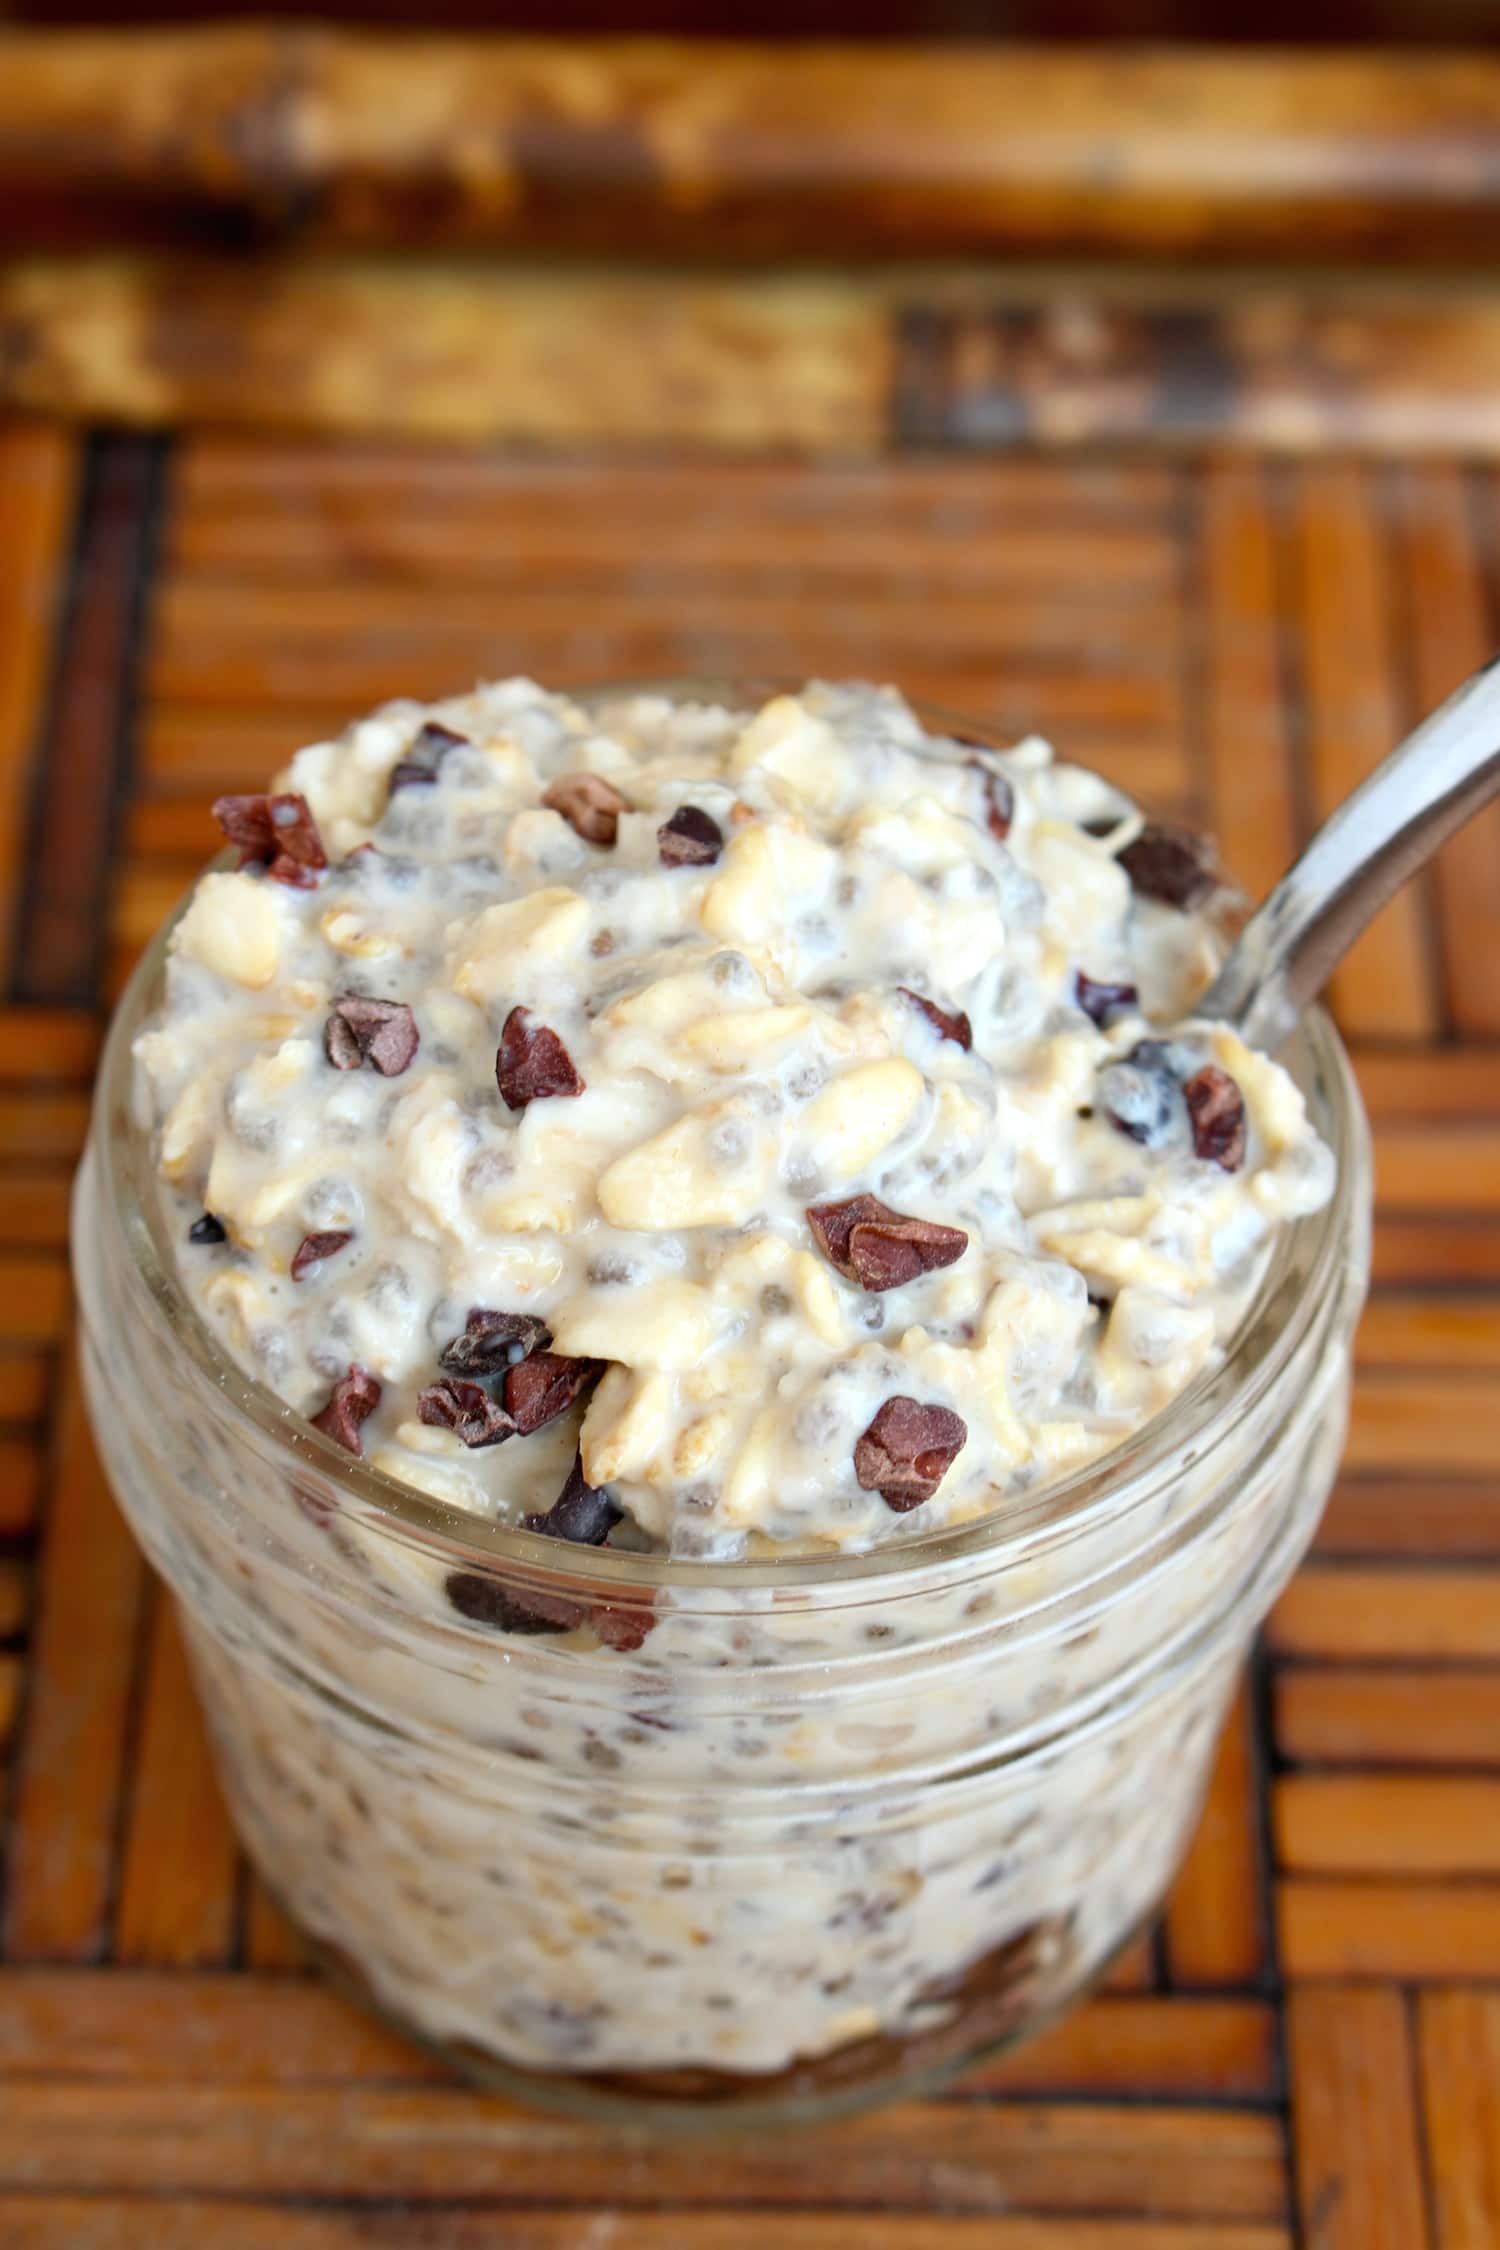 Healthy Cookie Dough Overnight Oats